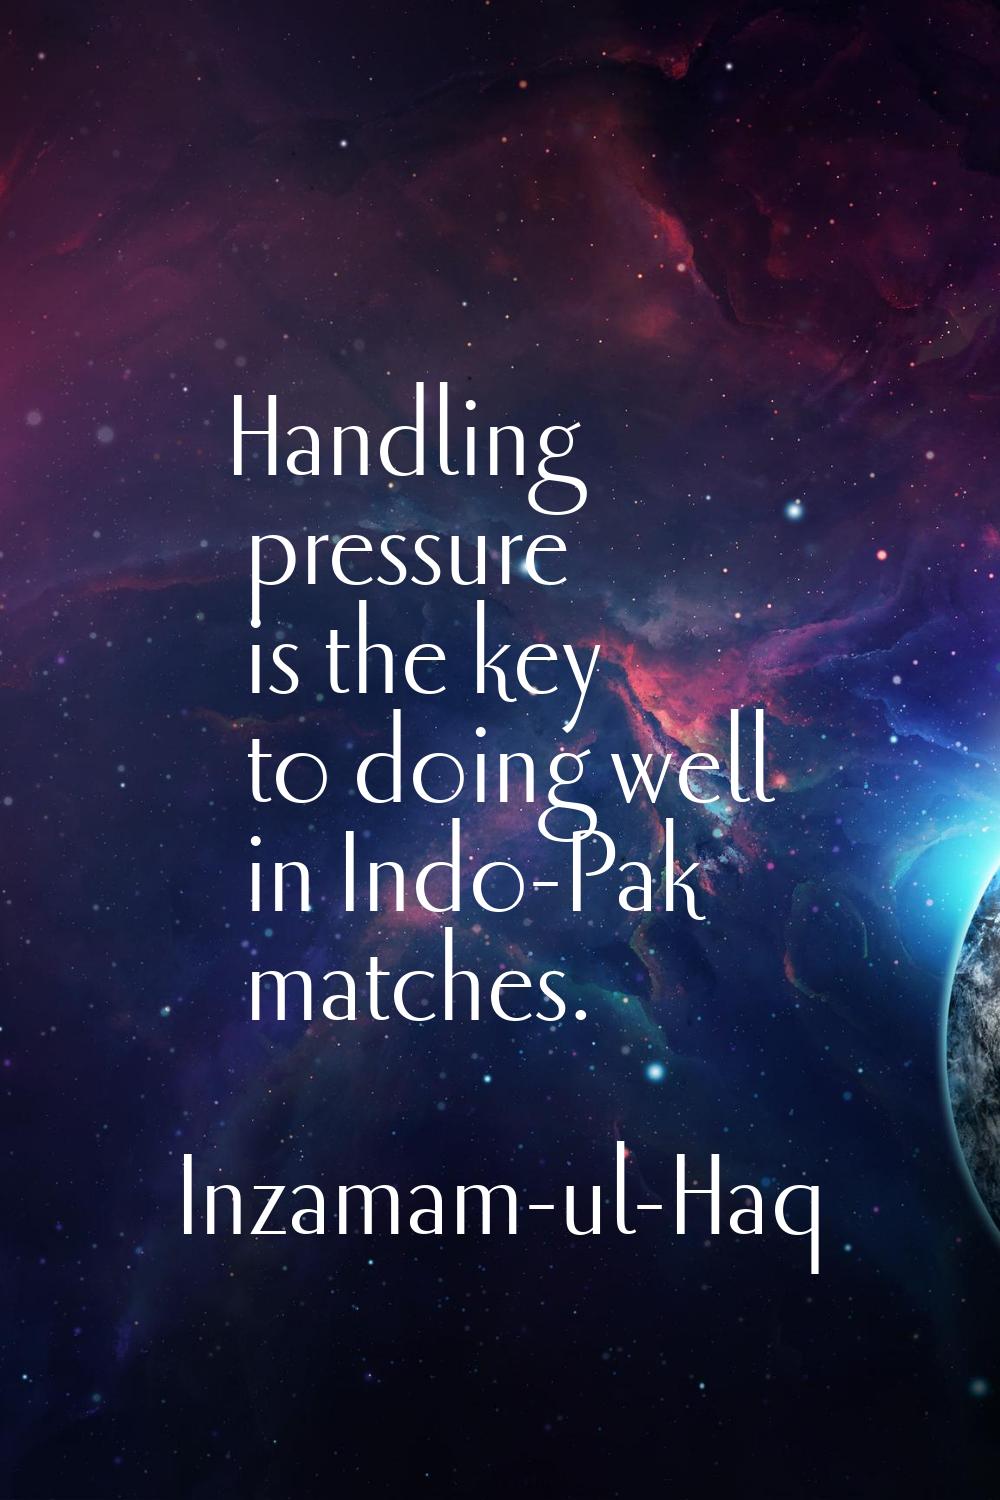 Handling pressure is the key to doing well in Indo-Pak matches.